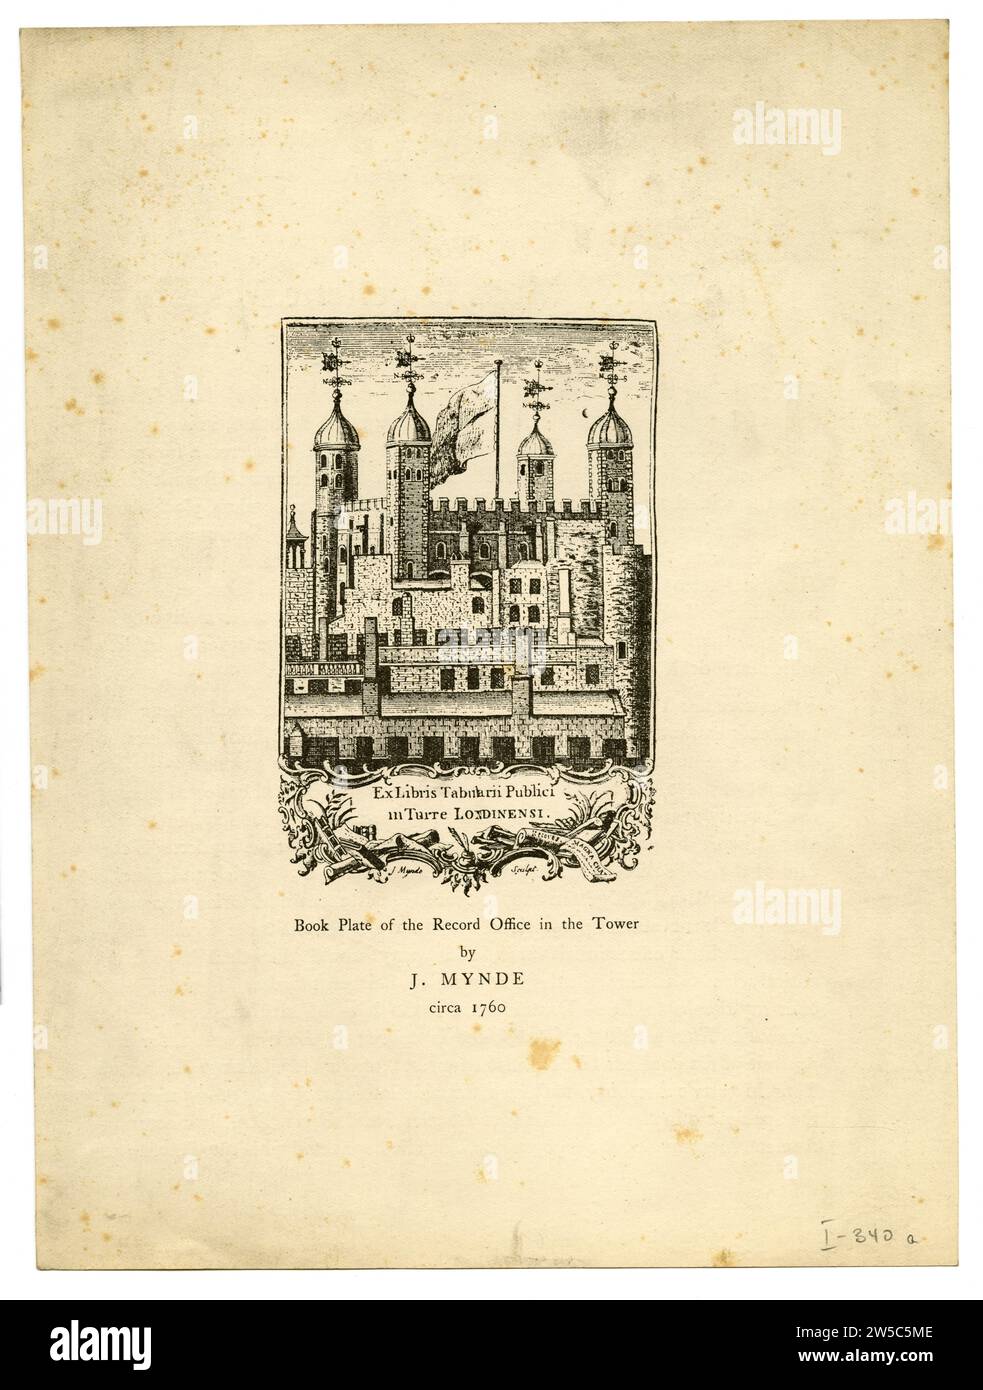 Engraved bookplate of the Record Office in the Tower of London, designed 1760, London, Britain, by J.Mynde Stock Photo